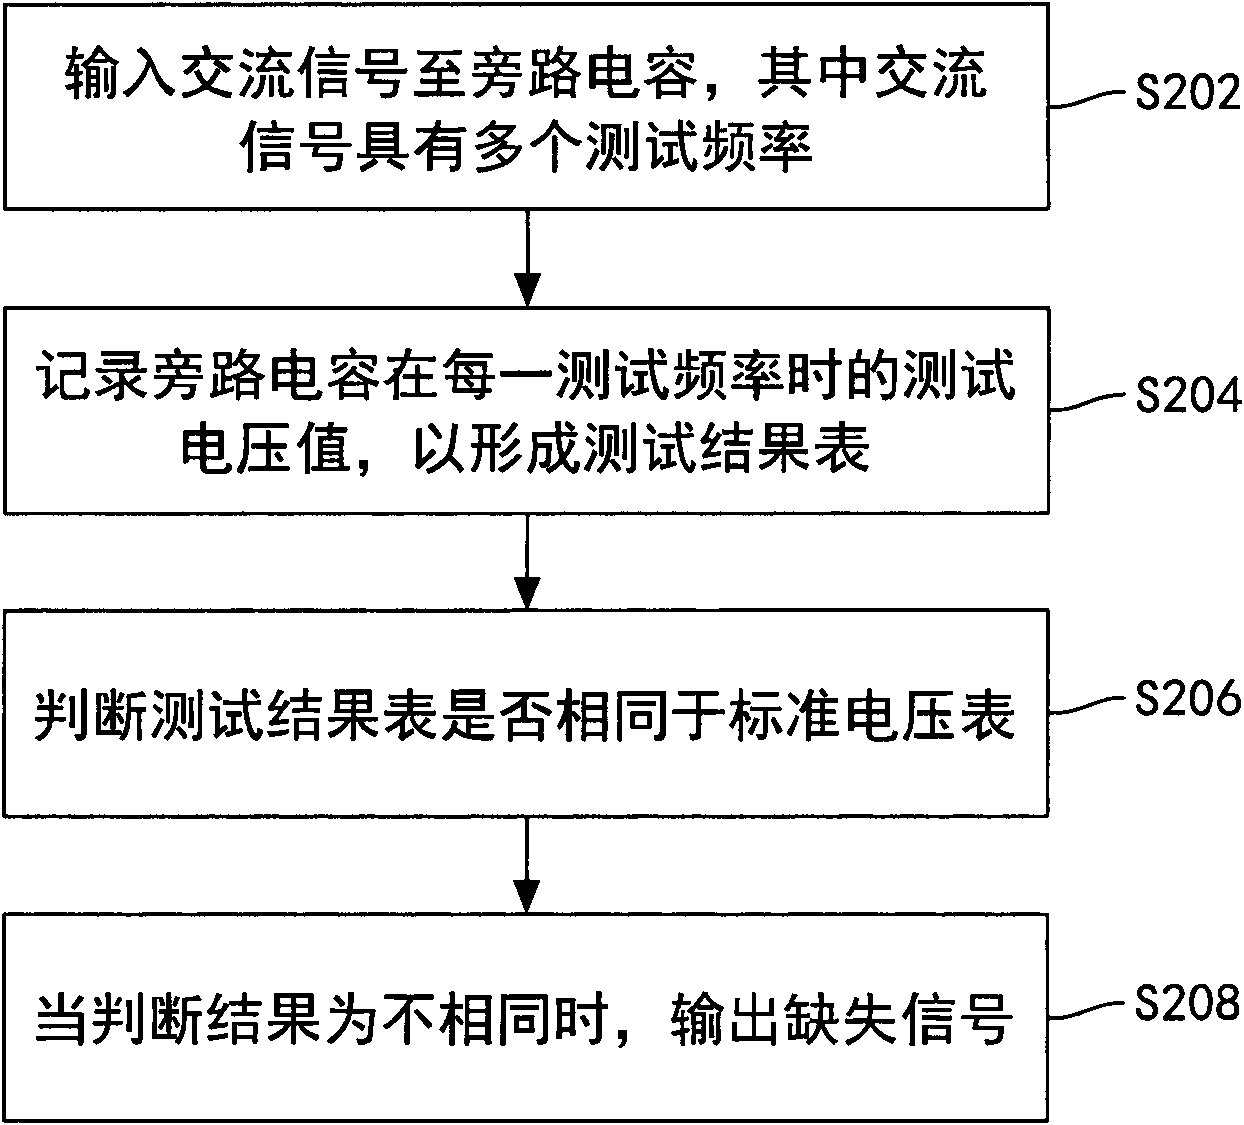 Method for detecting capacitor deficiency